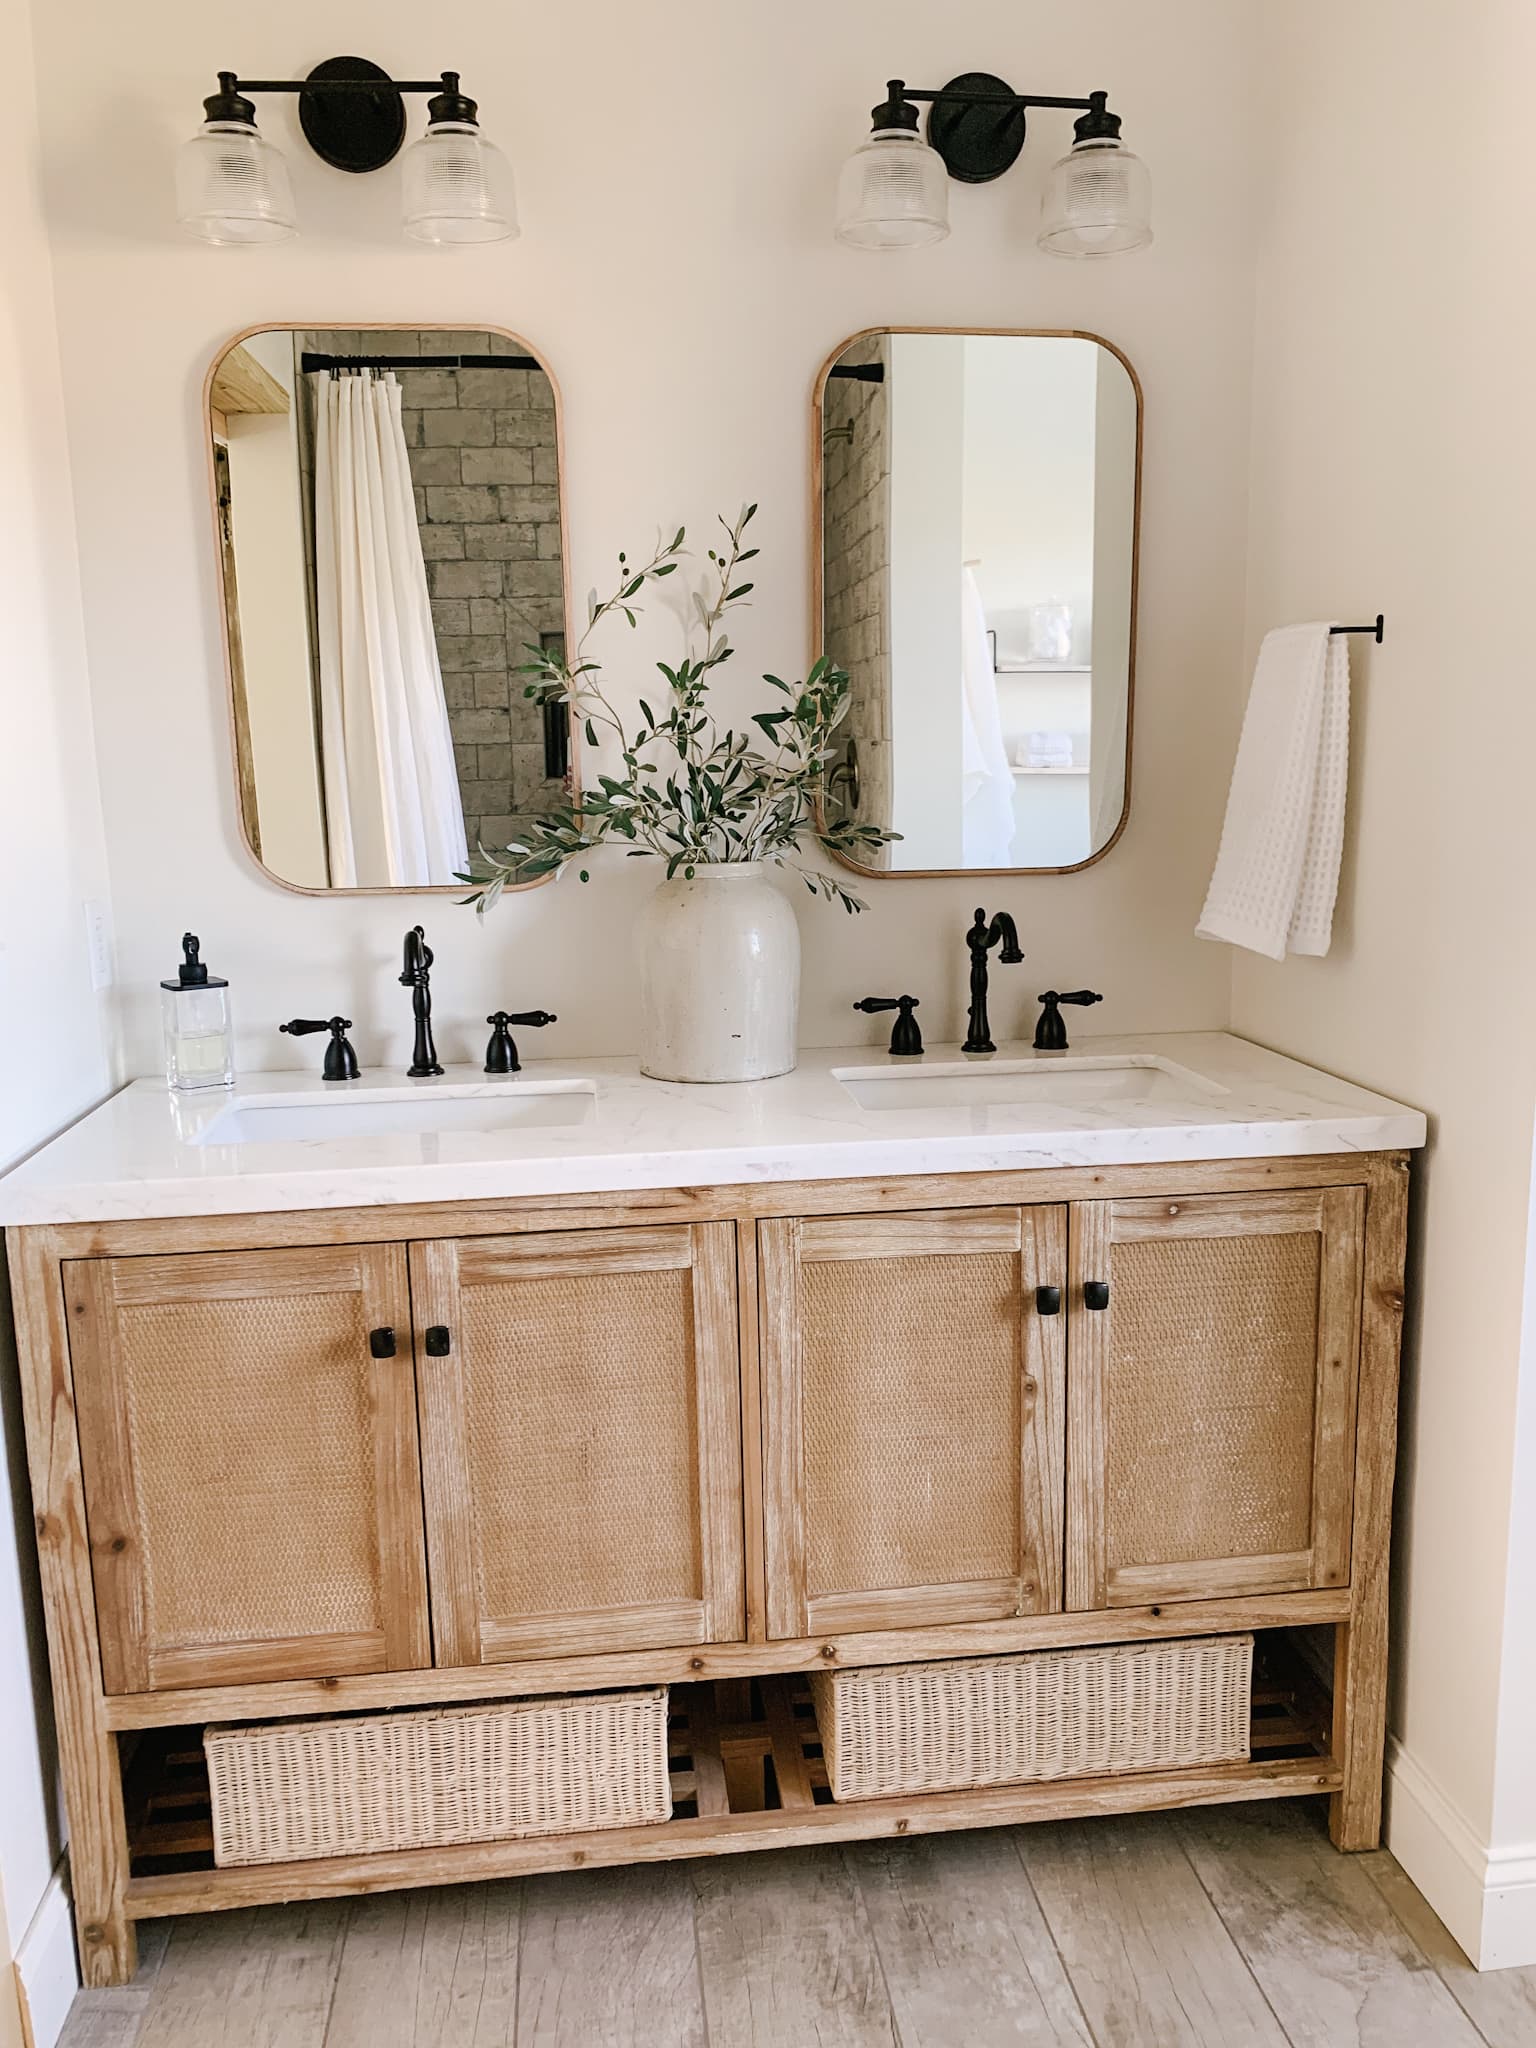 clean and modern bathroom with wooden framed mirrors